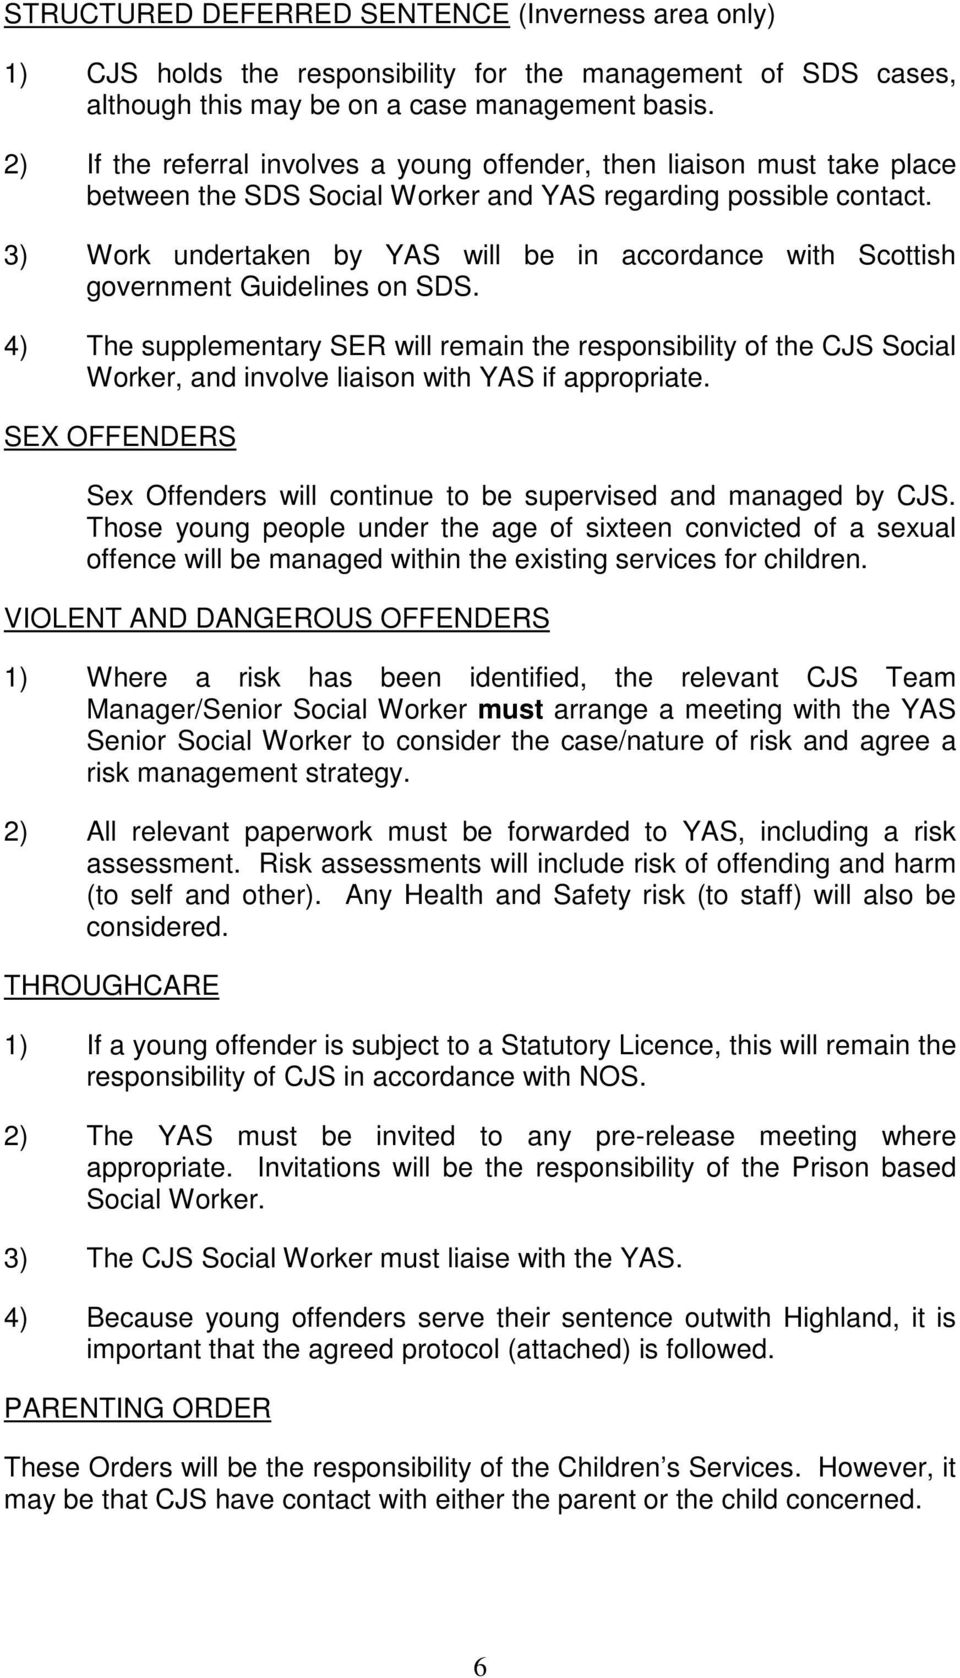 3) Work undertaken by YAS will be in accordance with Scottish government Guidelines on SDS.